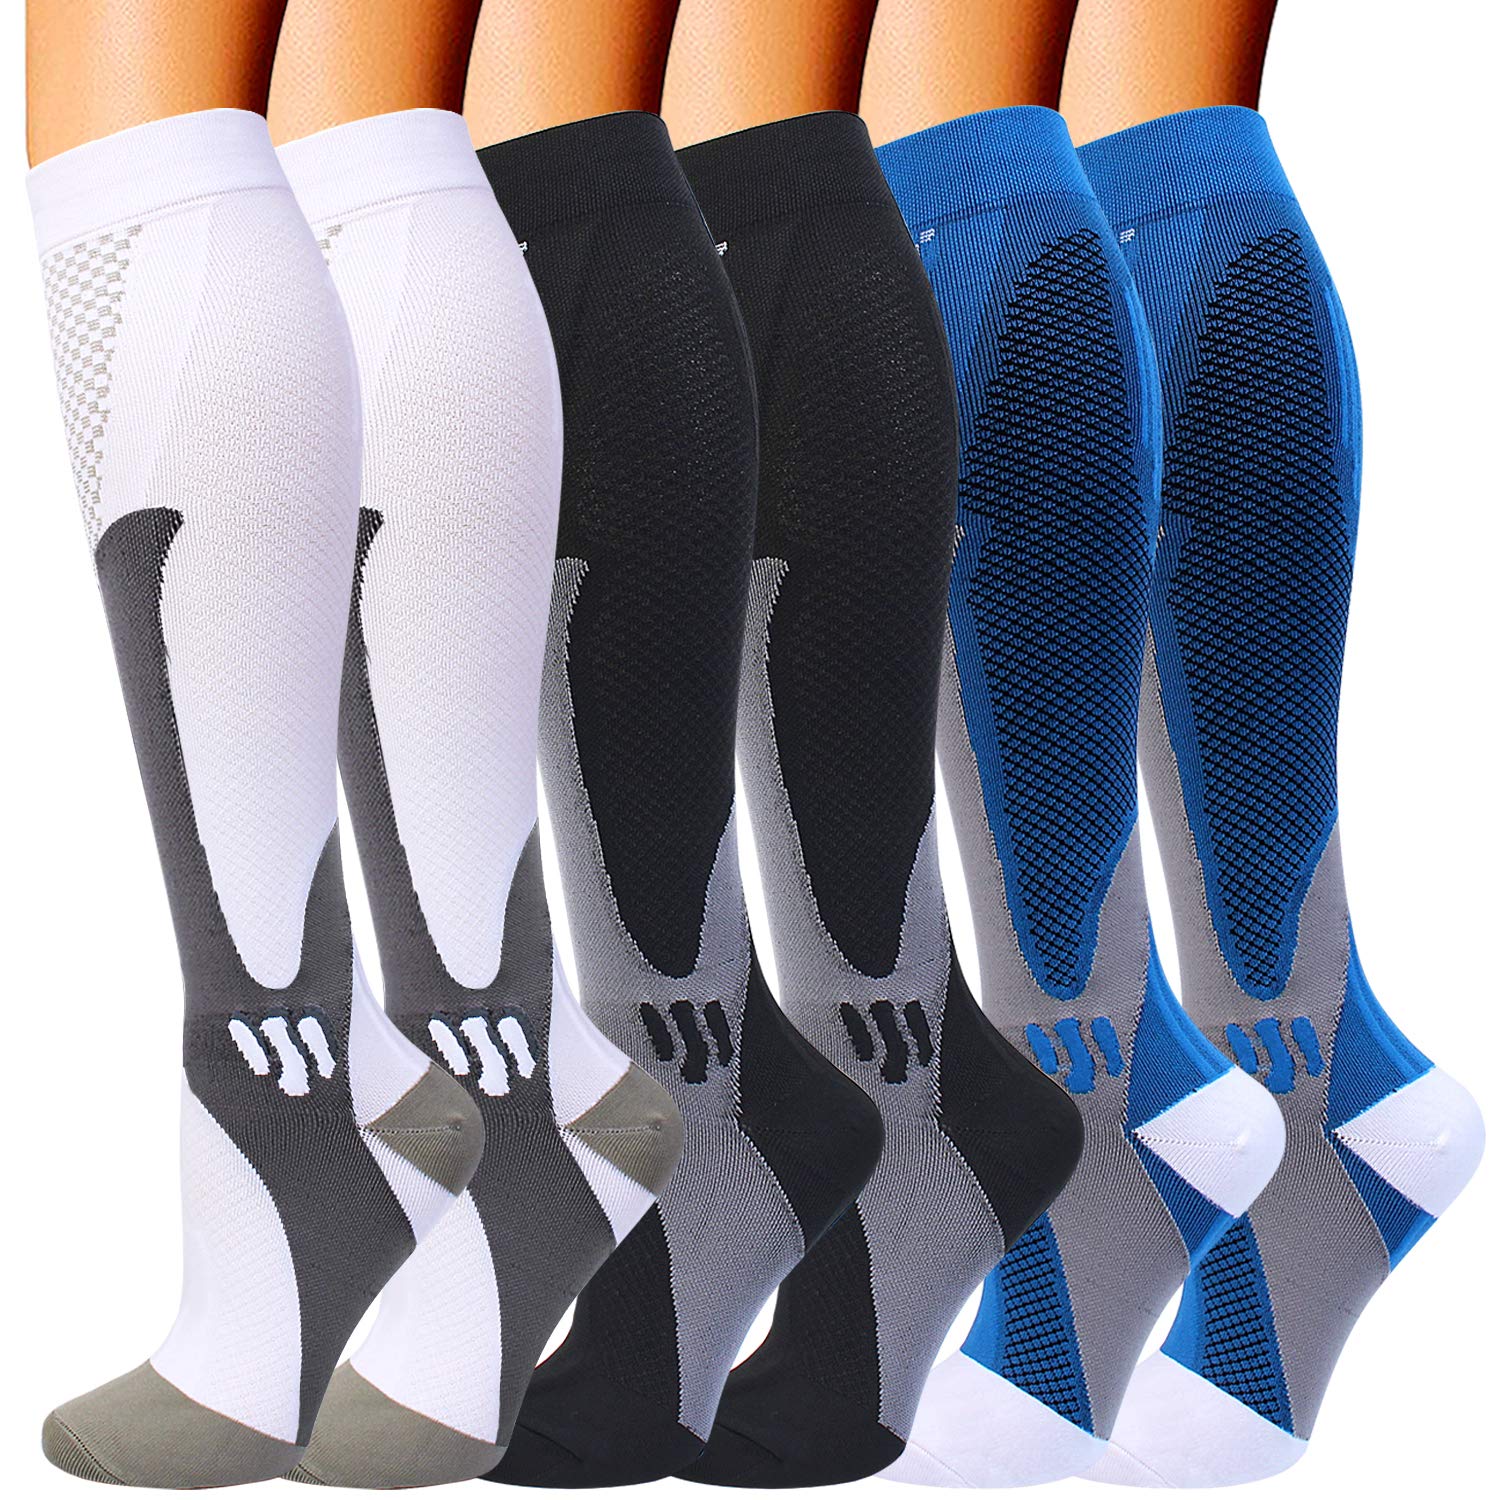 1 Pair Open Toe Compression Socks for Women and Men Circulation, 20-30mmHg  Is Best Leg Support for Running, Athletic, Sport, Gym